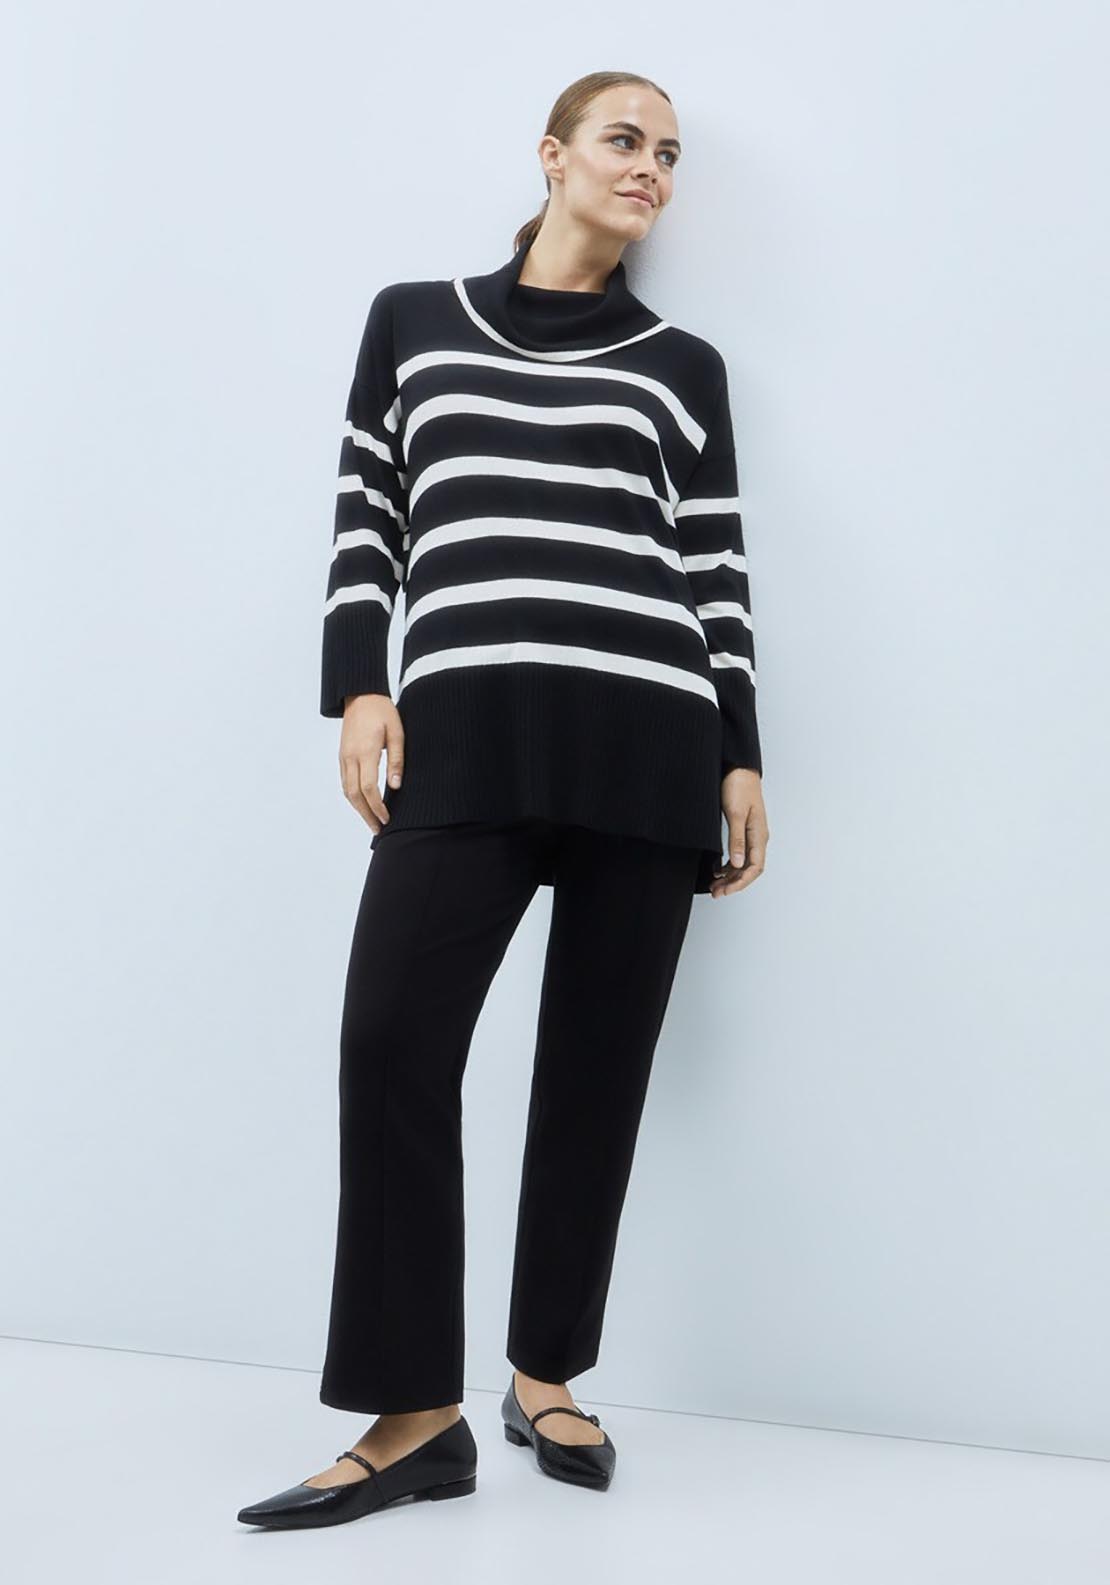 Couchel Round Collar Knit Sweater - Black 3 Shaws Department Stores